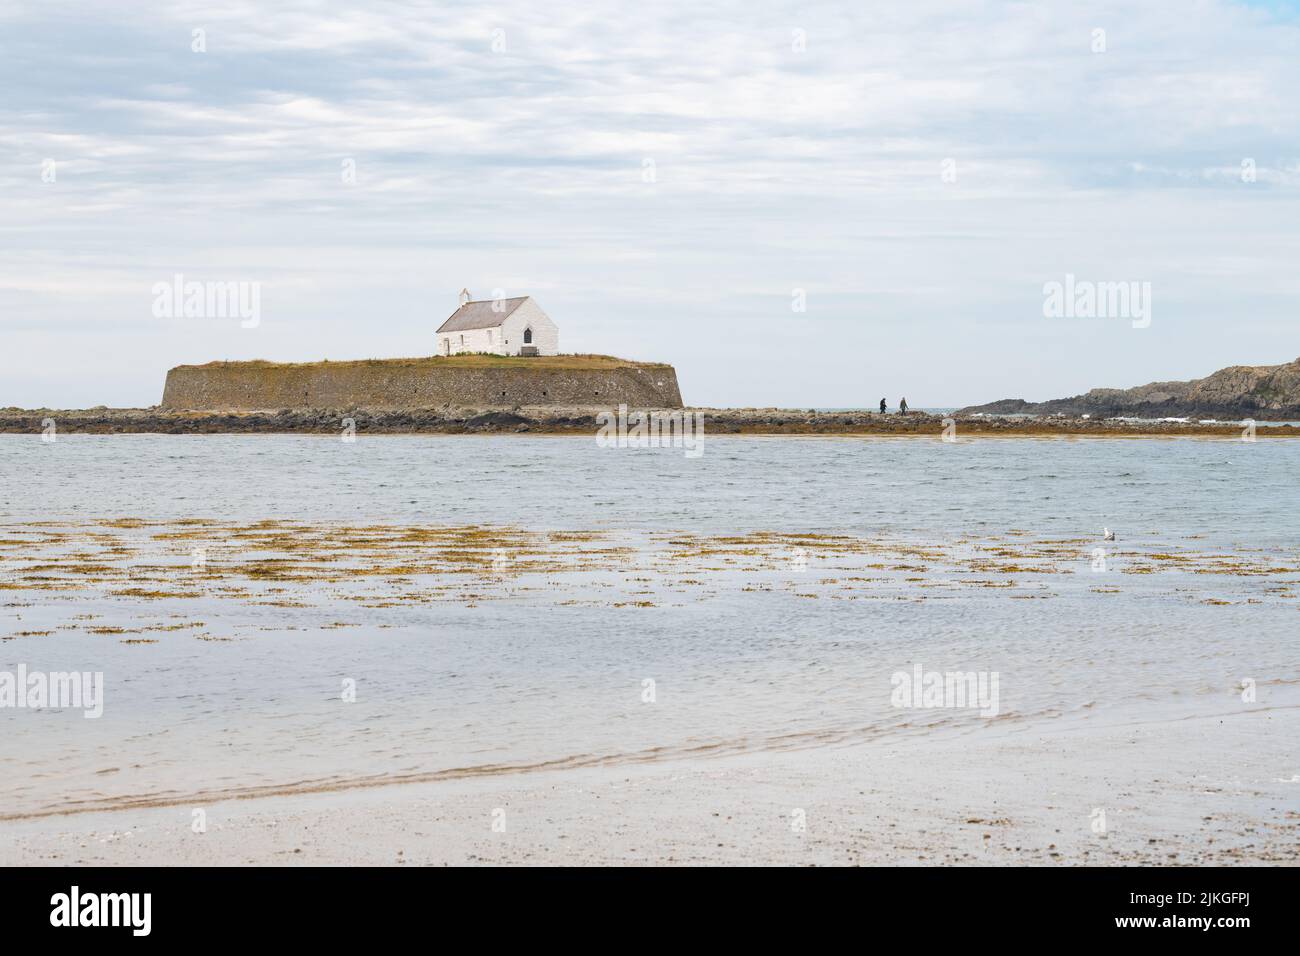 St Cwyfans Church - Kirche im Meer - Isle of Anglesey, Wales Stockfoto